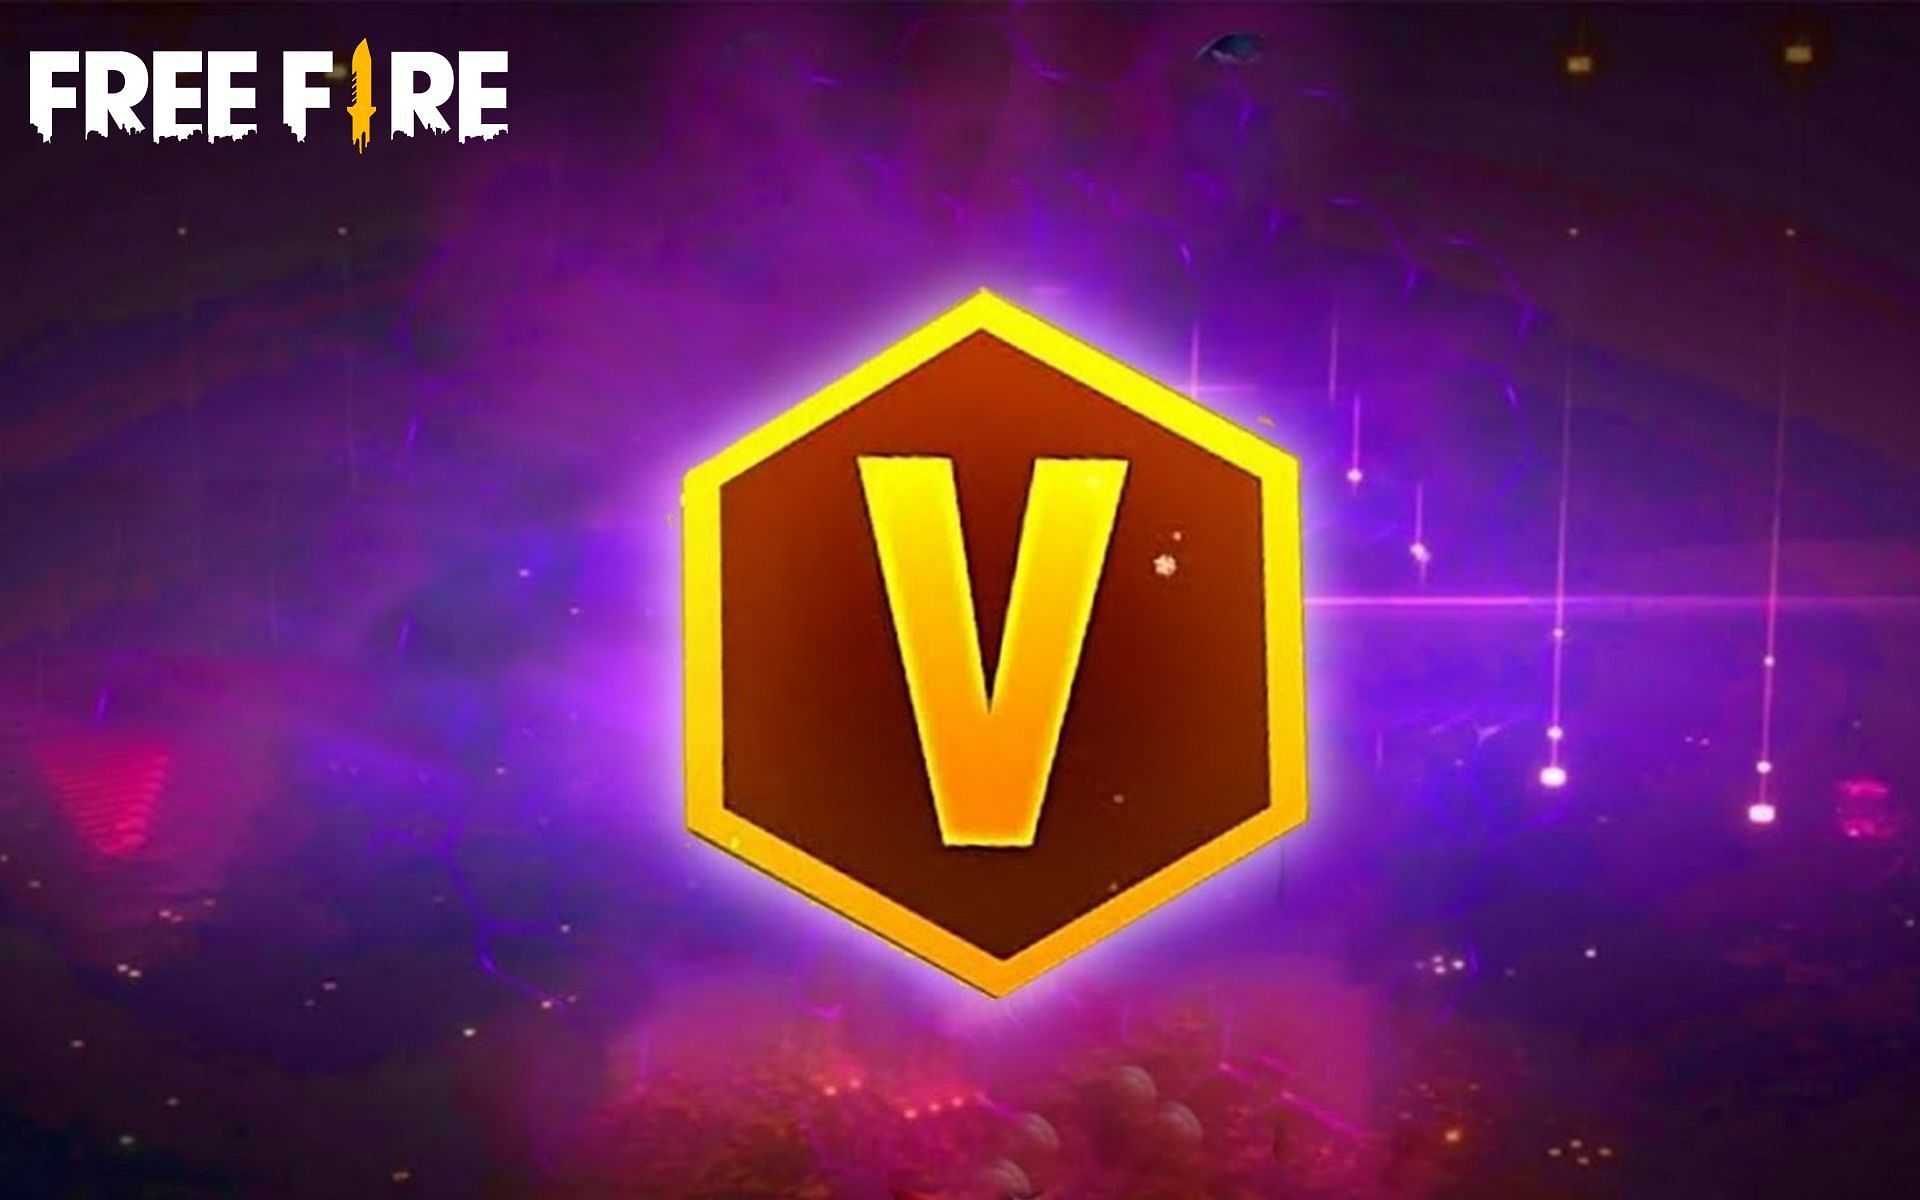 V Badge cannot be passed to others (Image via Free Fire)